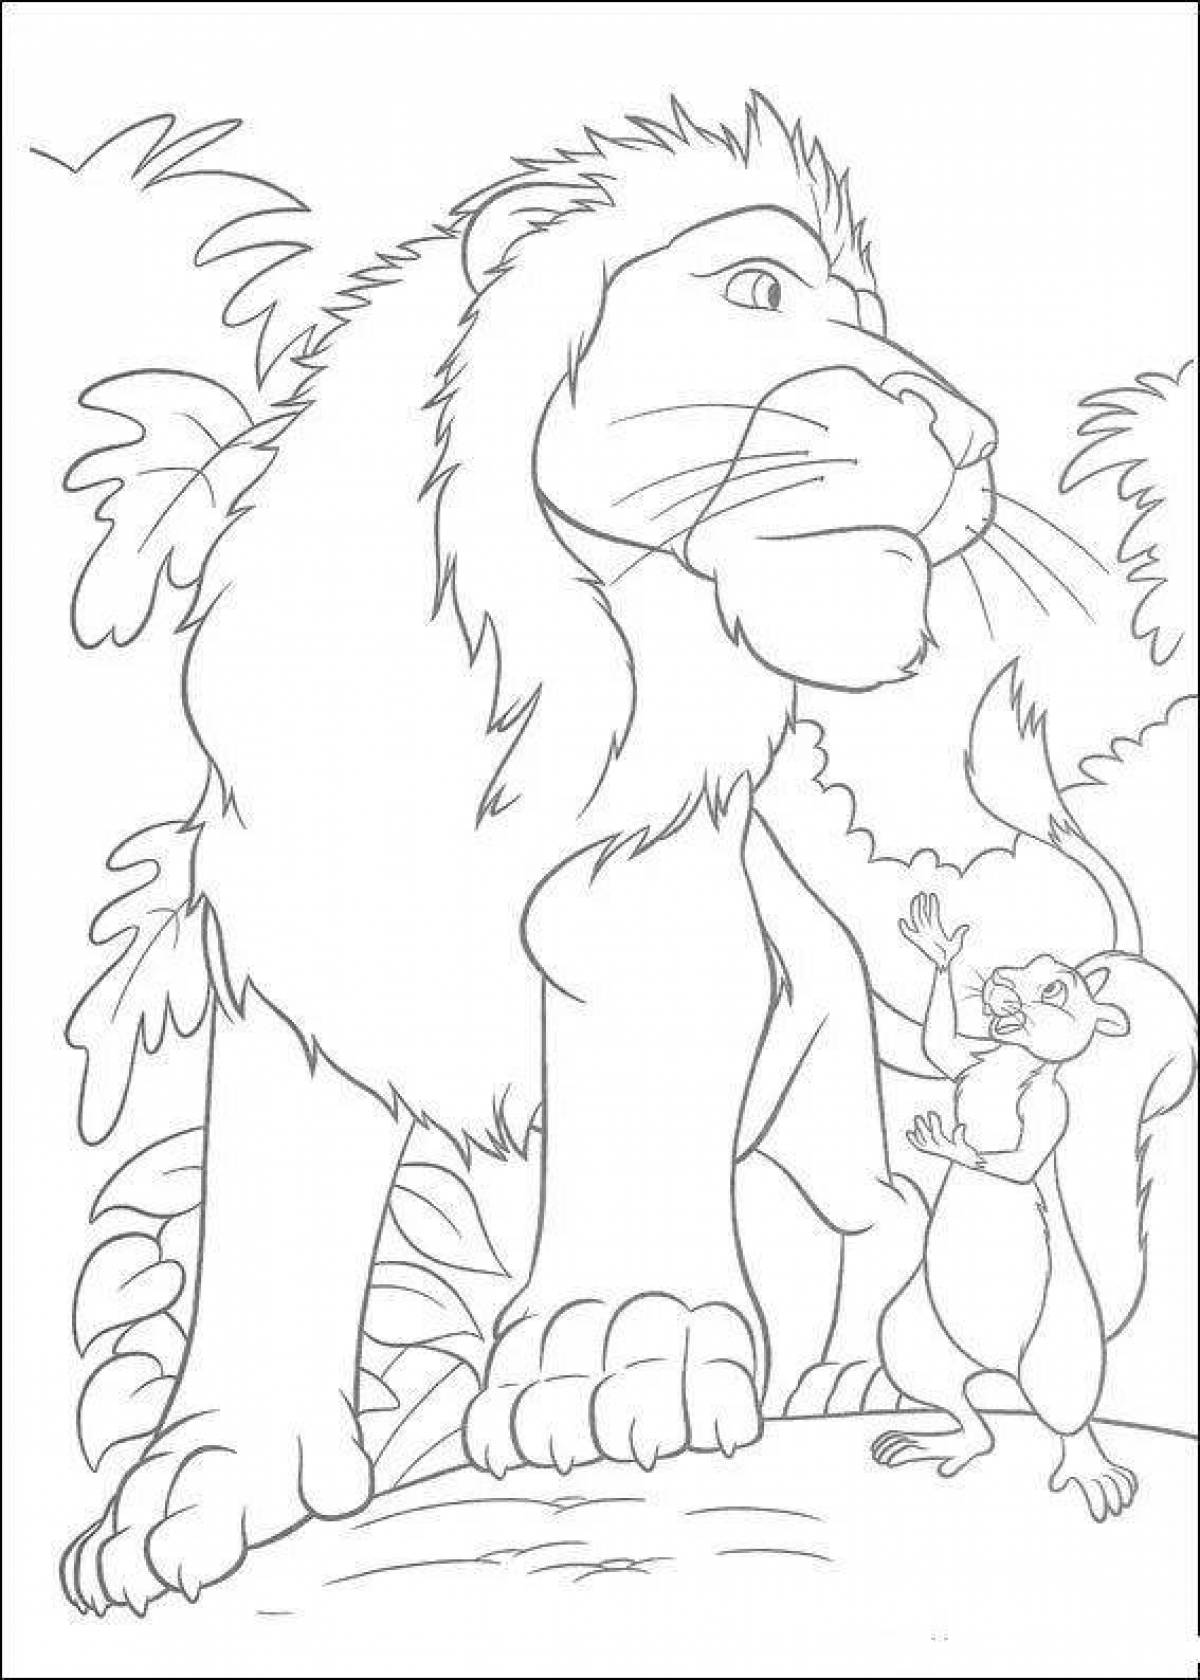 Big adventure colorful coloring page